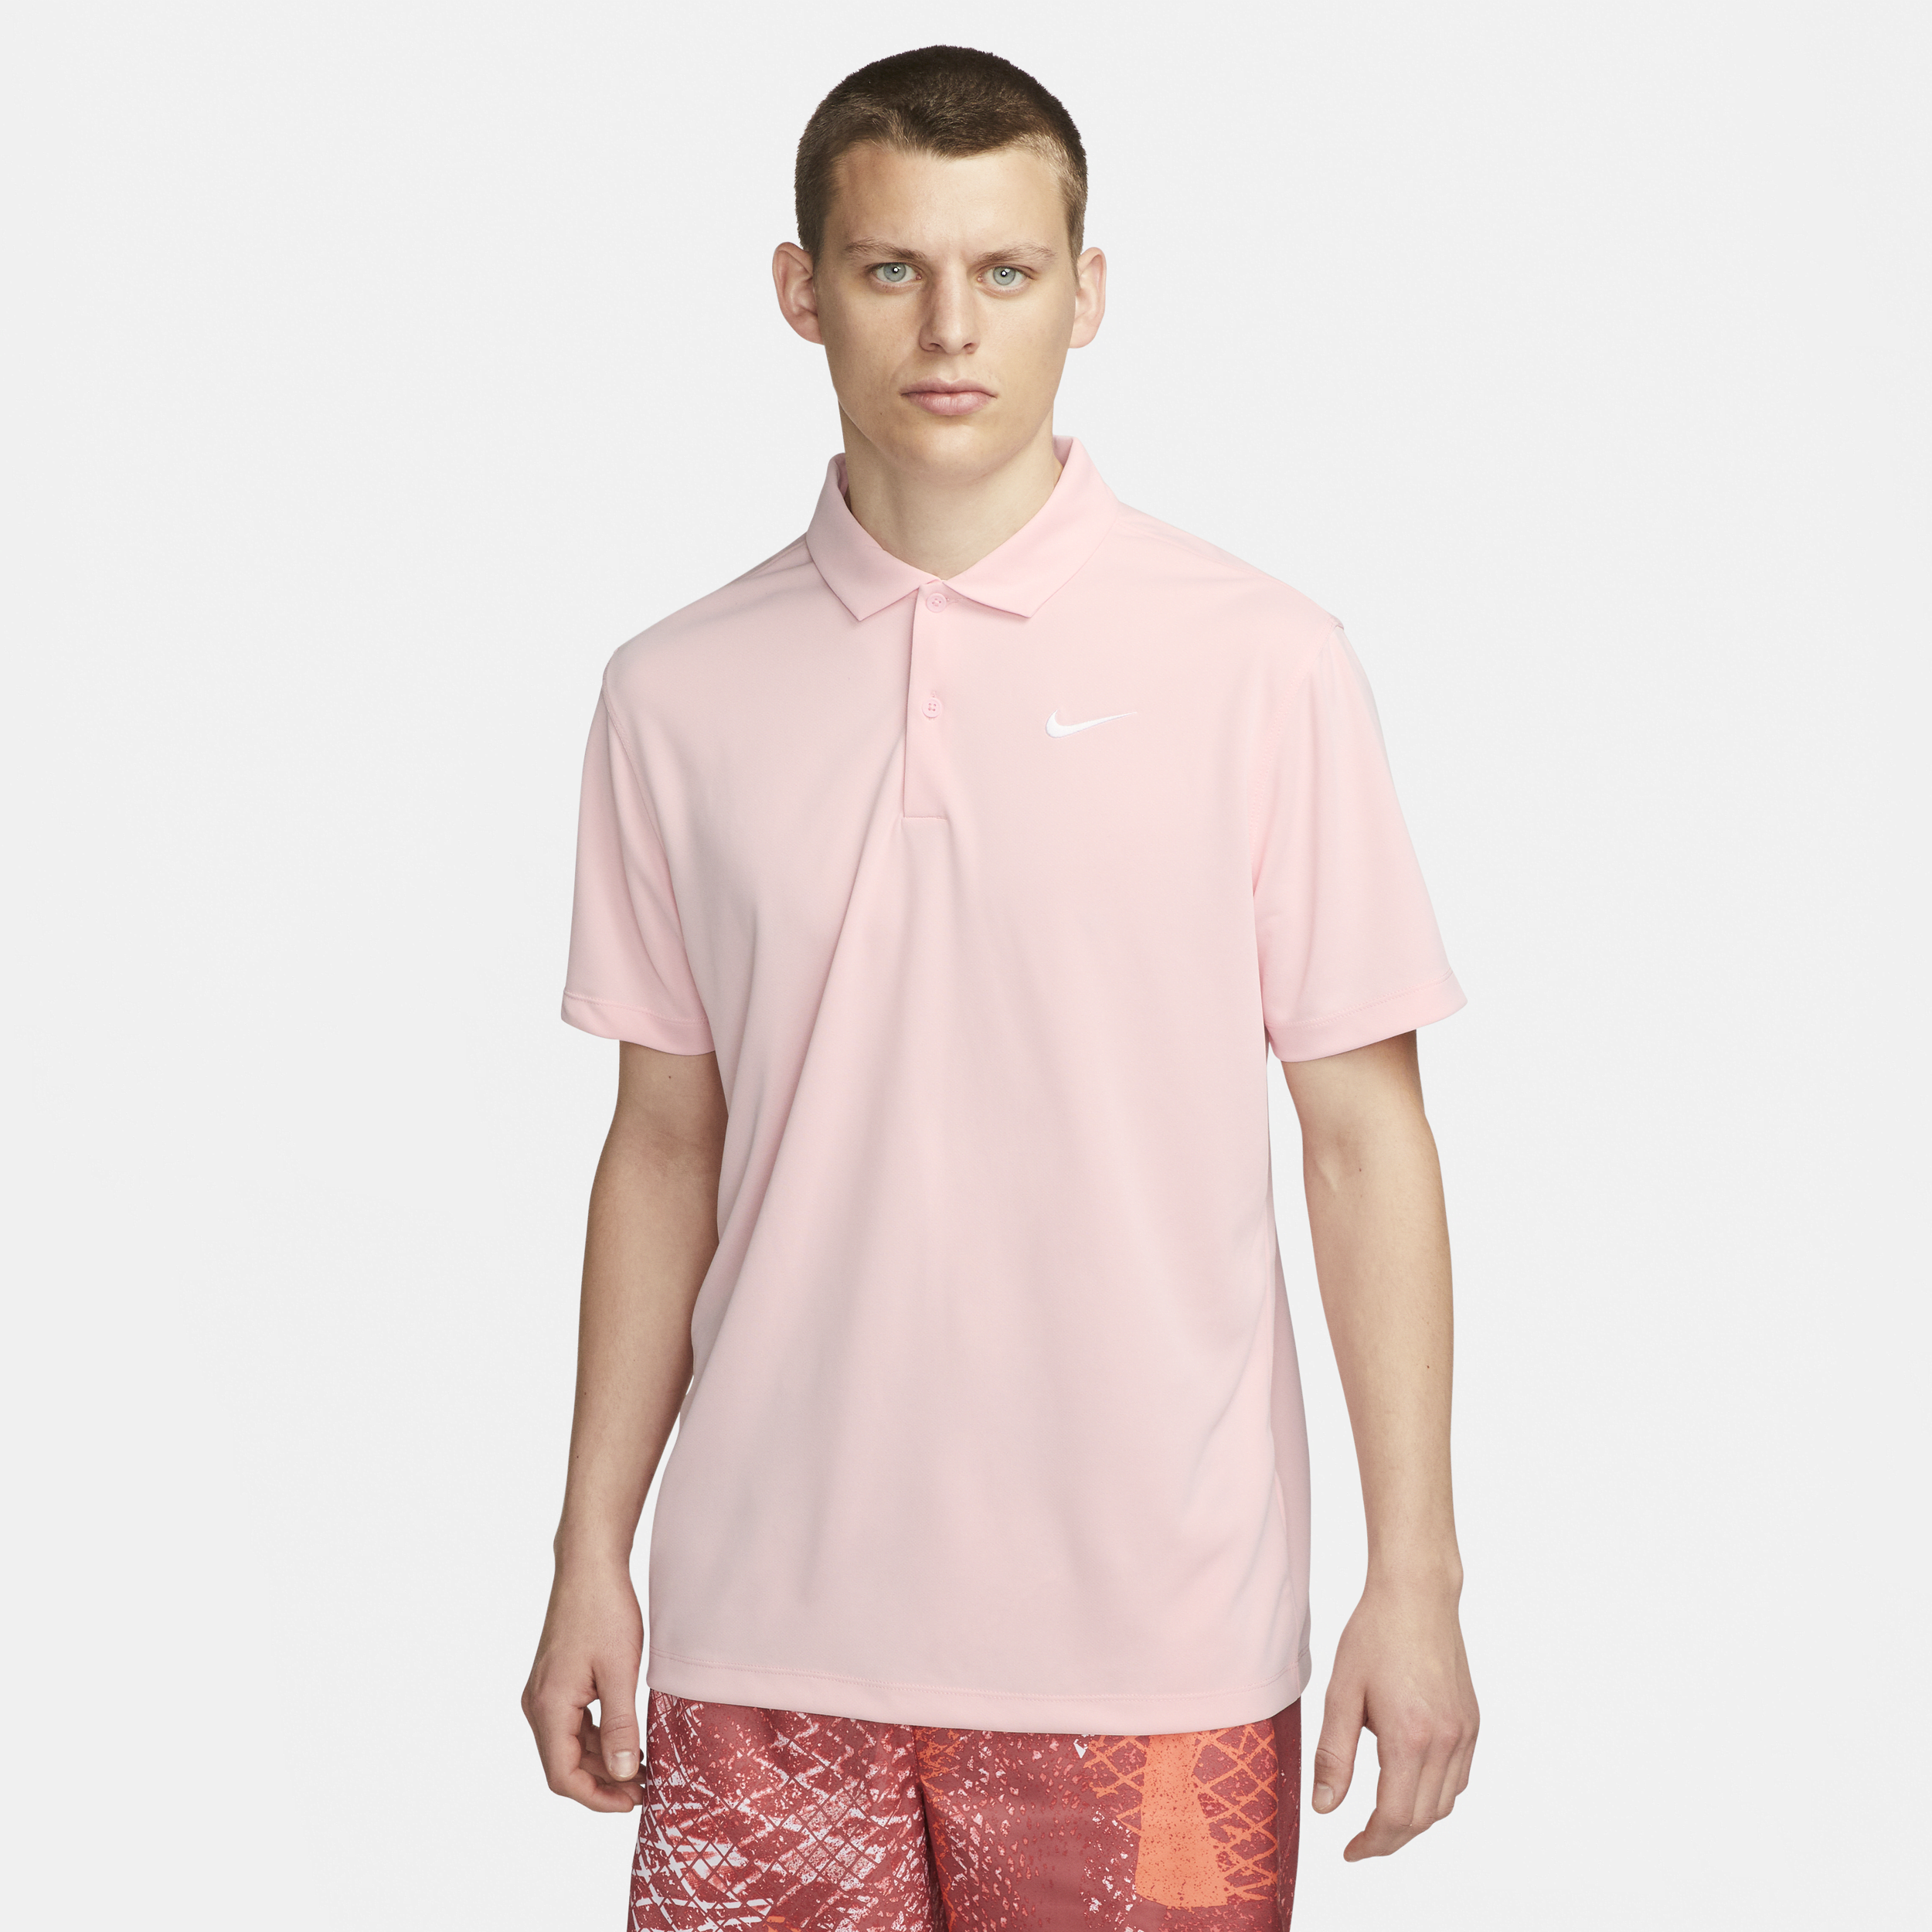 Nike Men's Court Dri-fit Tennis Polo In Pink